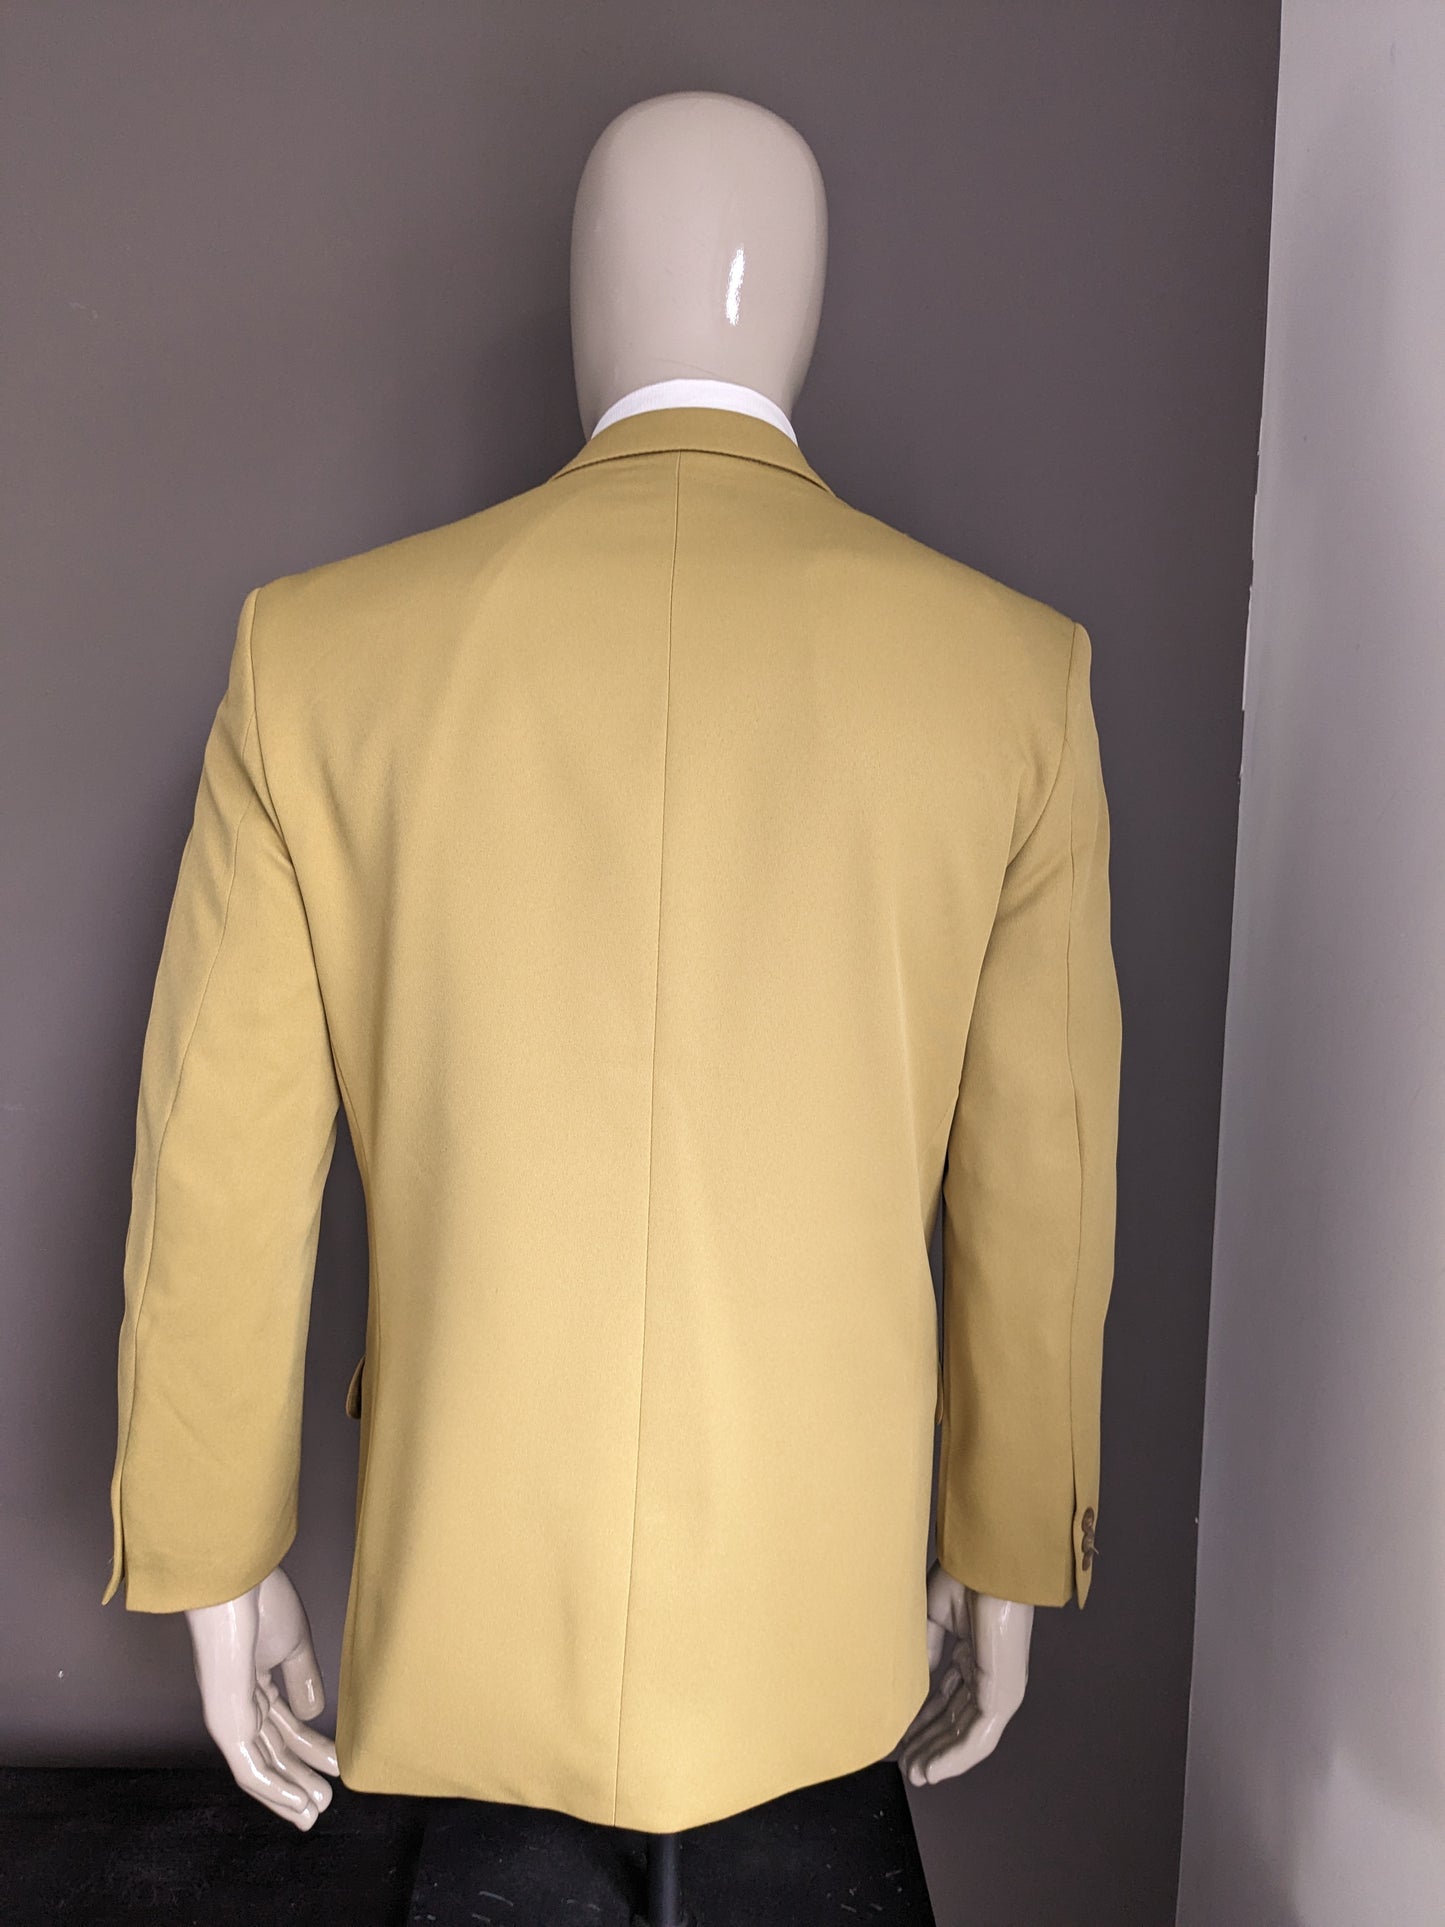 Vintage Double Breasted jacket. Mustard colored yellow. Size 48 / M.